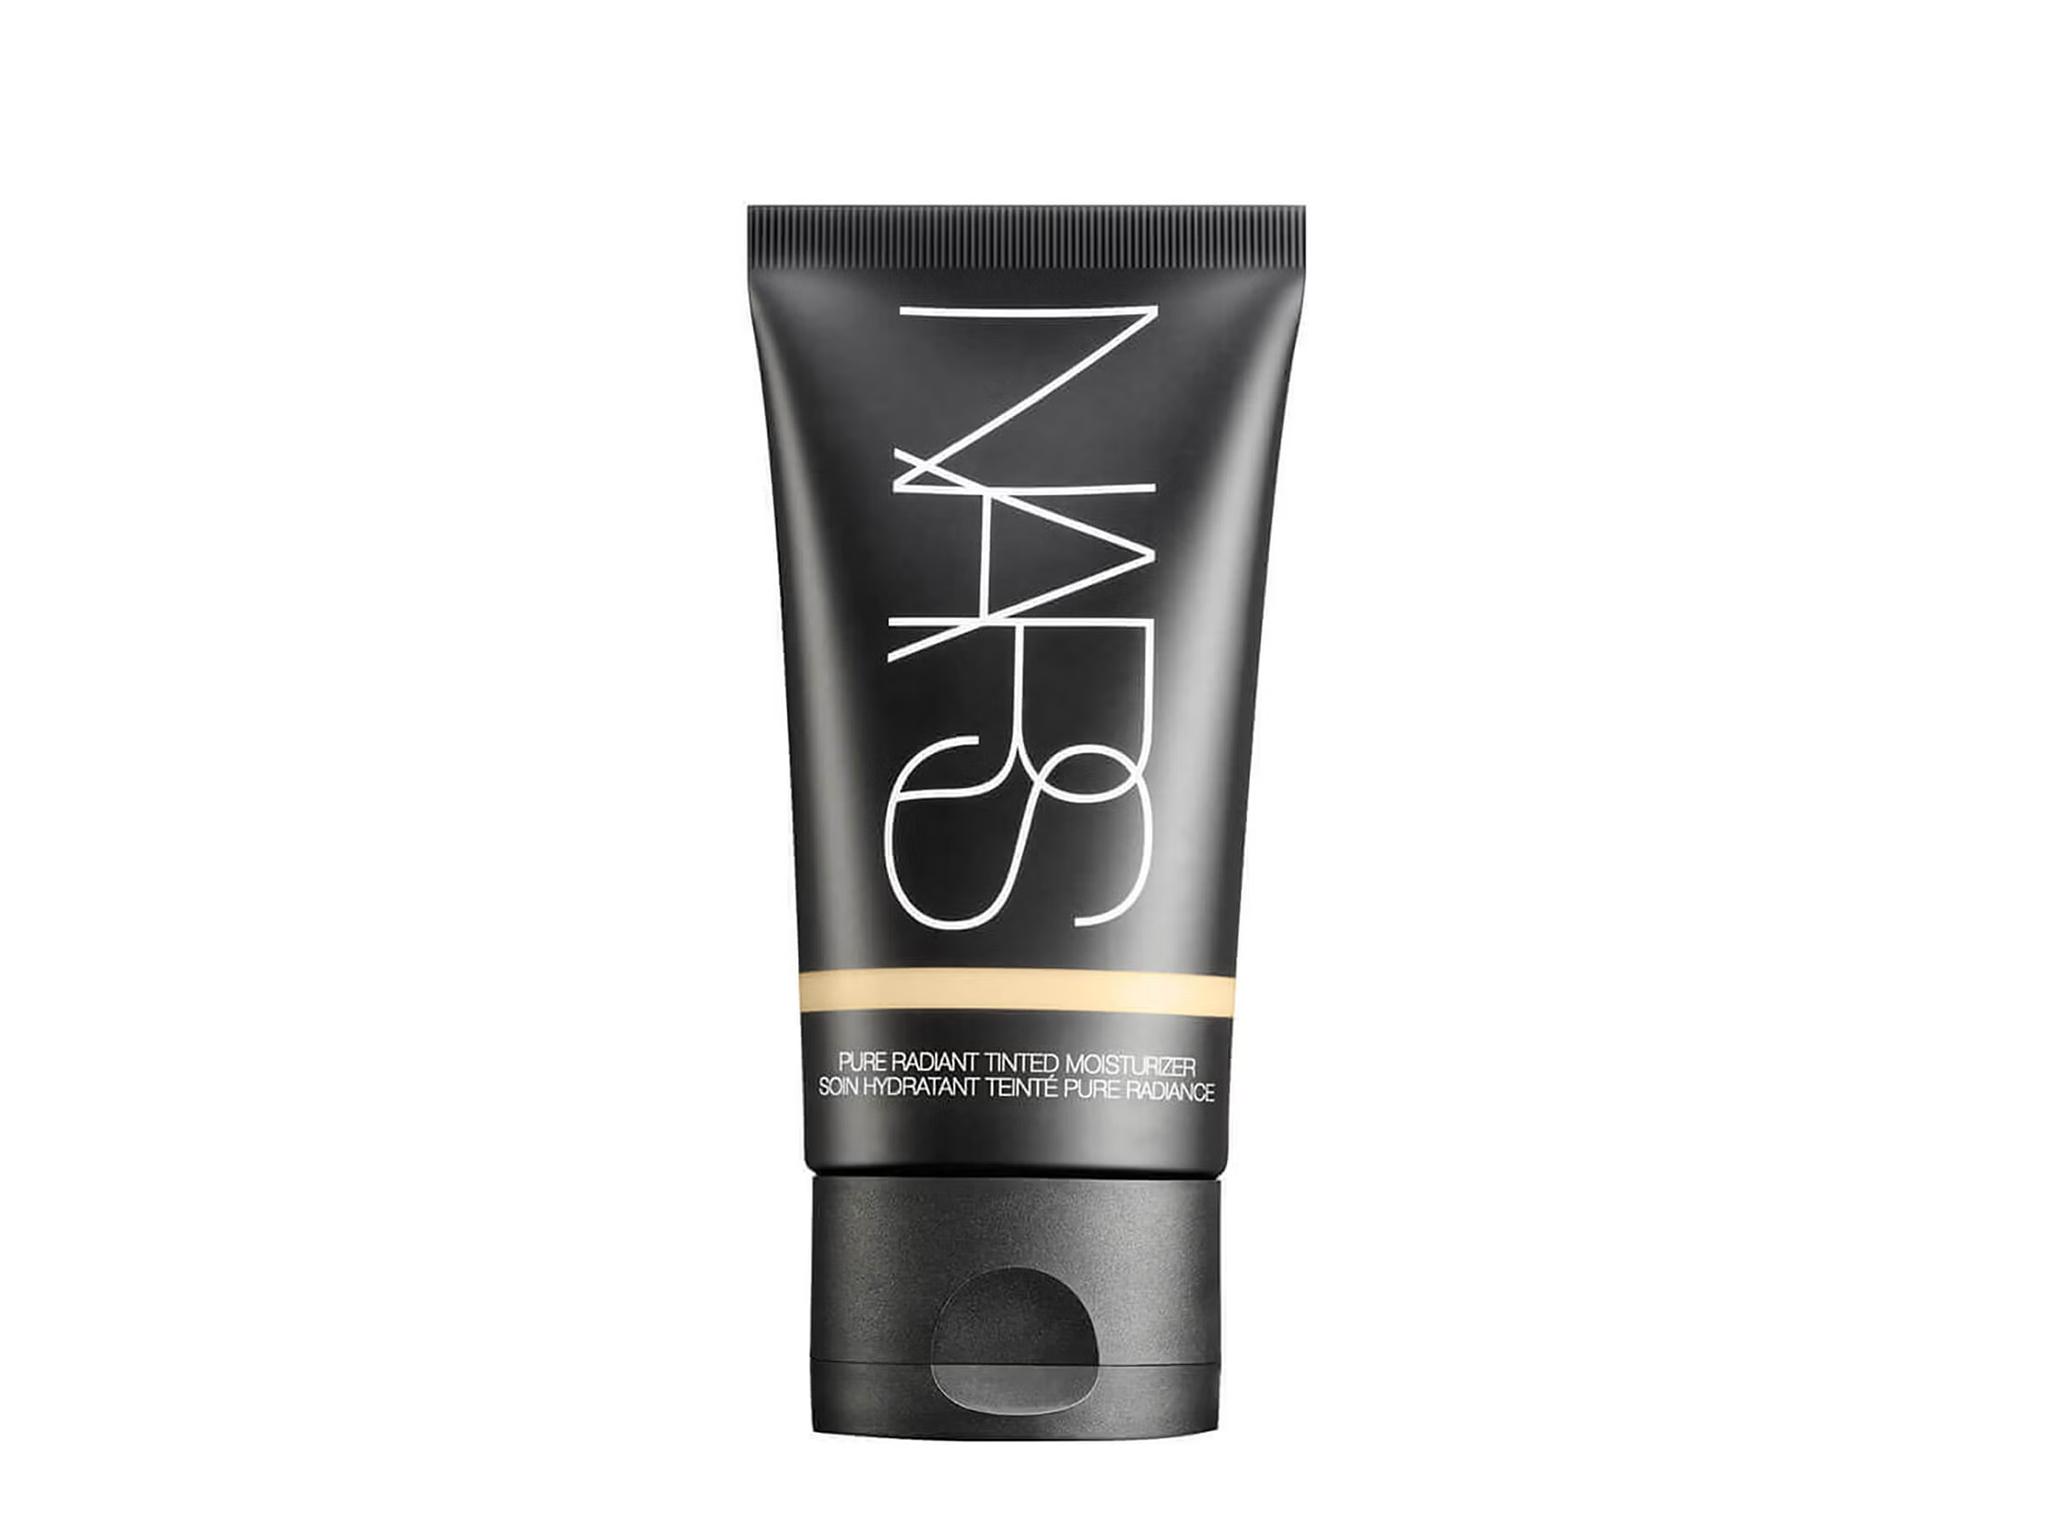 this nars tinted moisturiser is a must for dewy, no-make-up looks